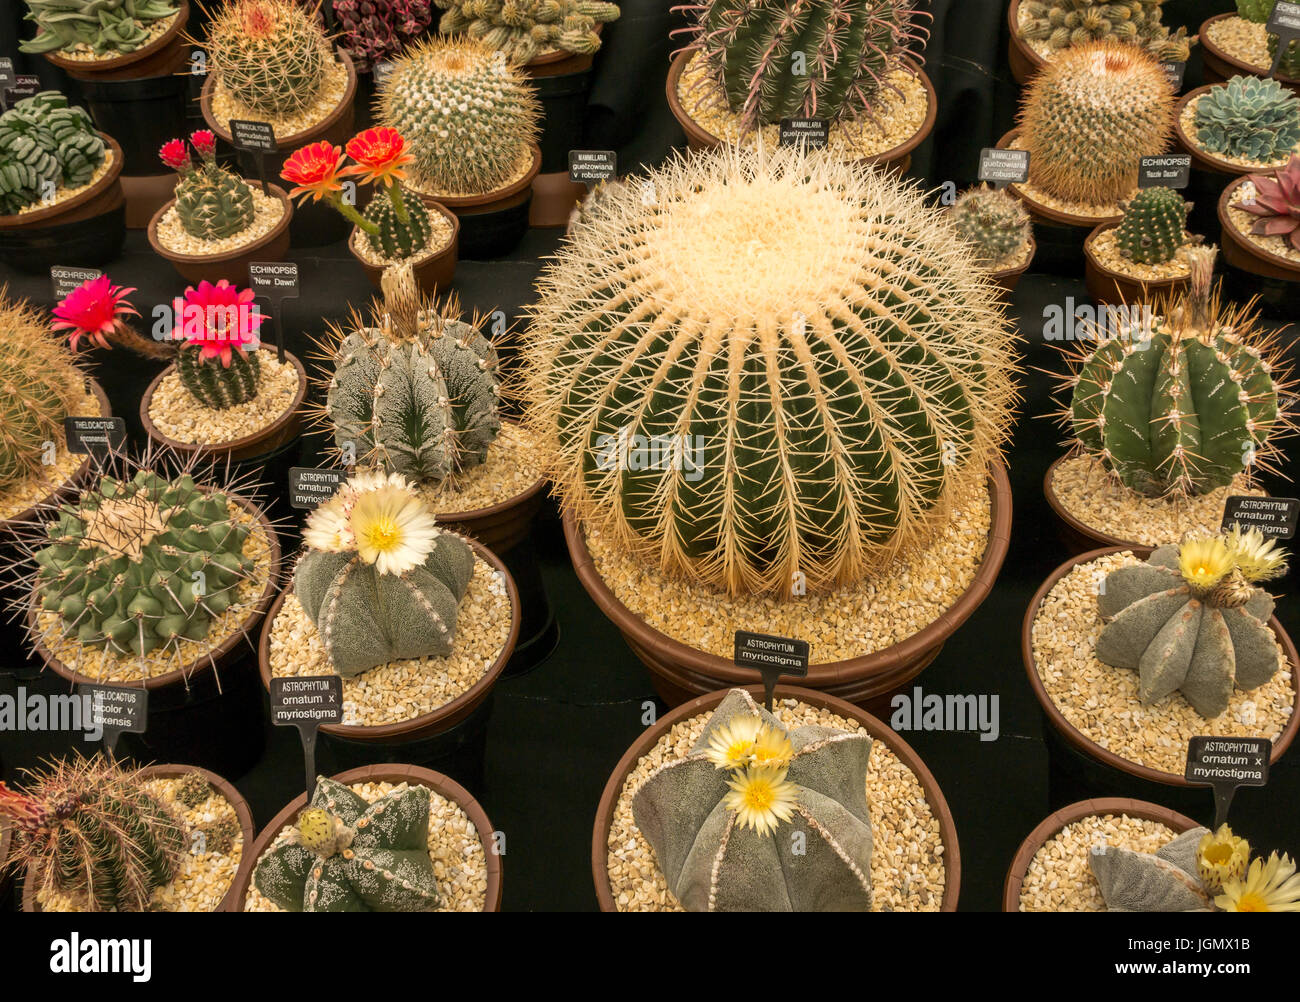 Flowering cactus varieties with goats horn cactus and globular cactus on display at RHS flower show, England, UK Stock Photo